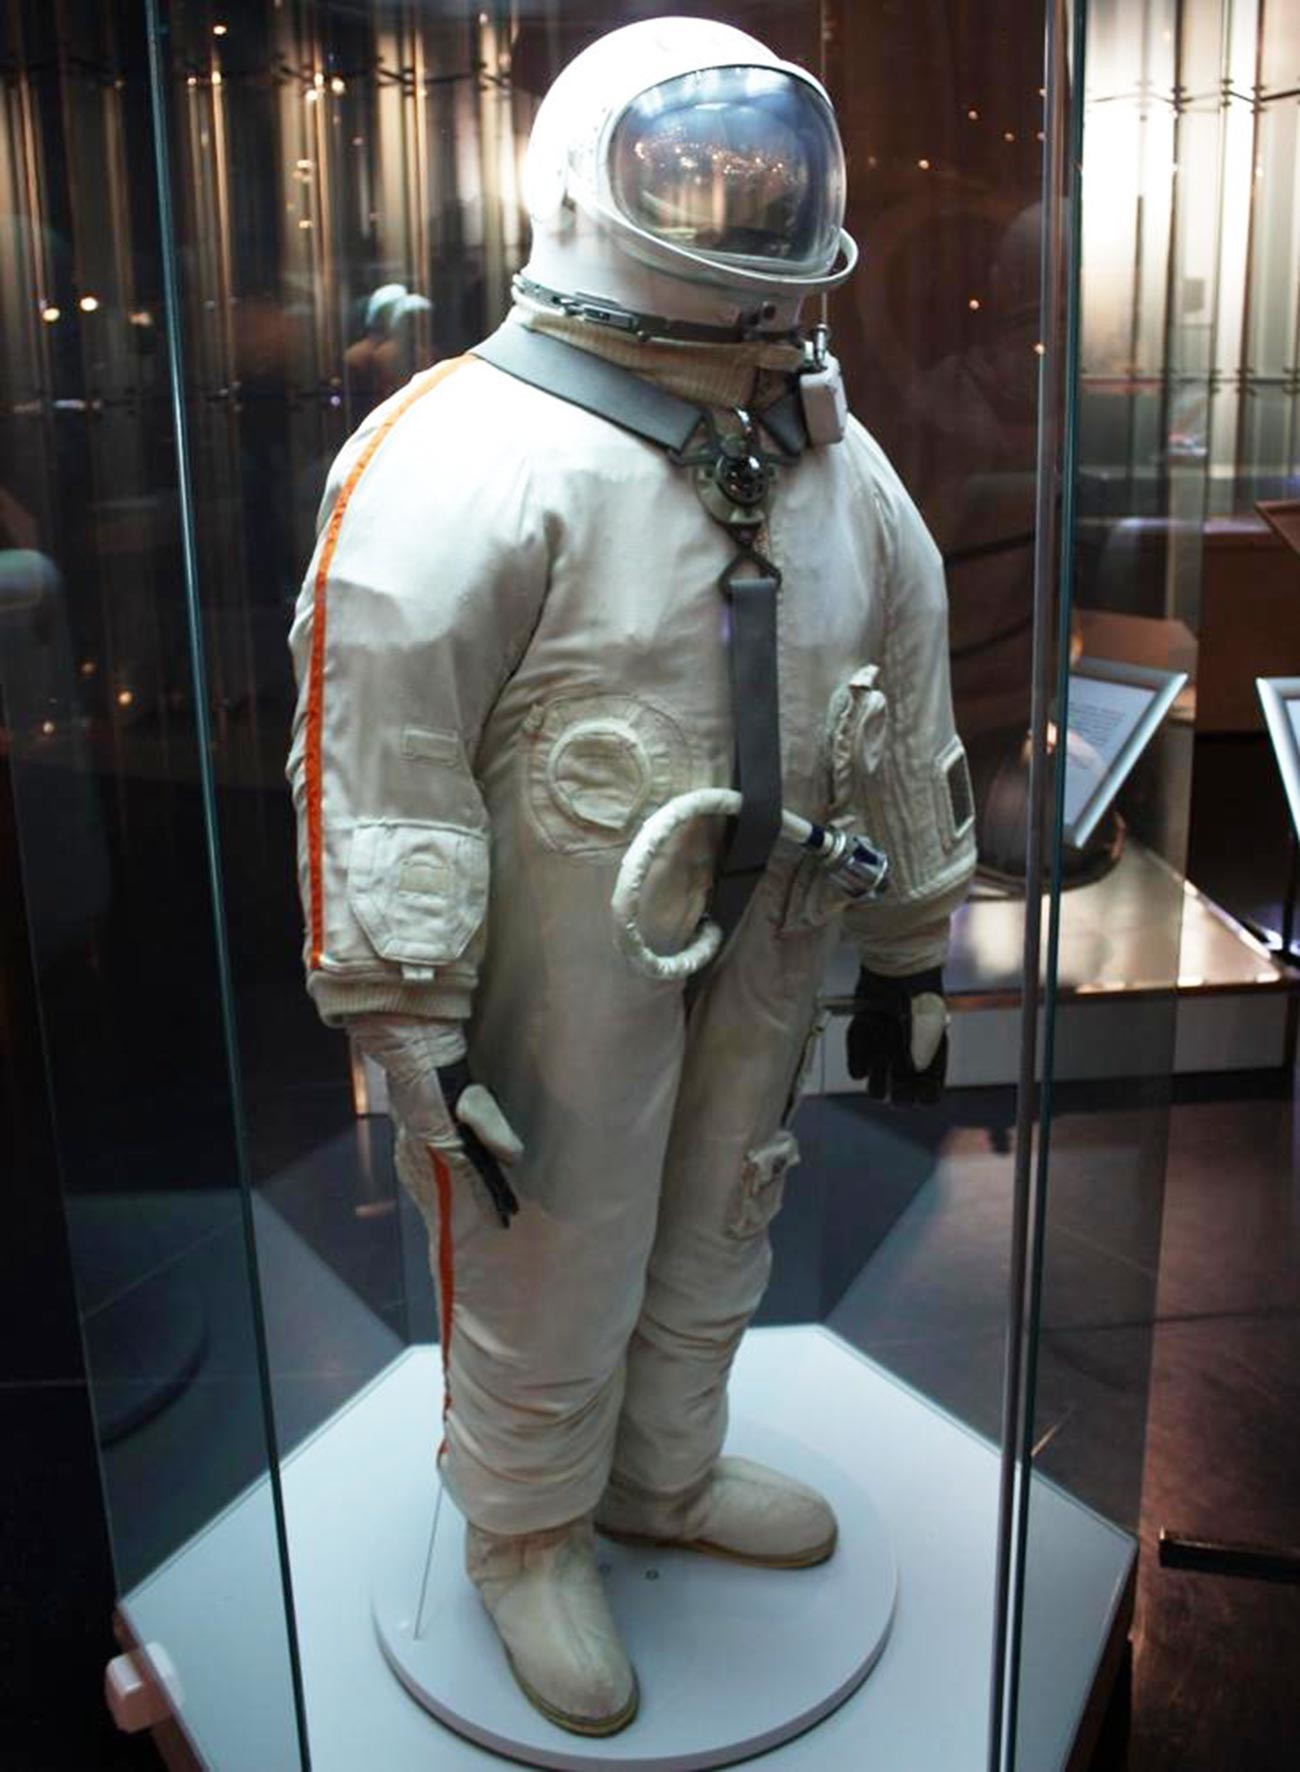 The Evolution of the Spacesuit in Pictures